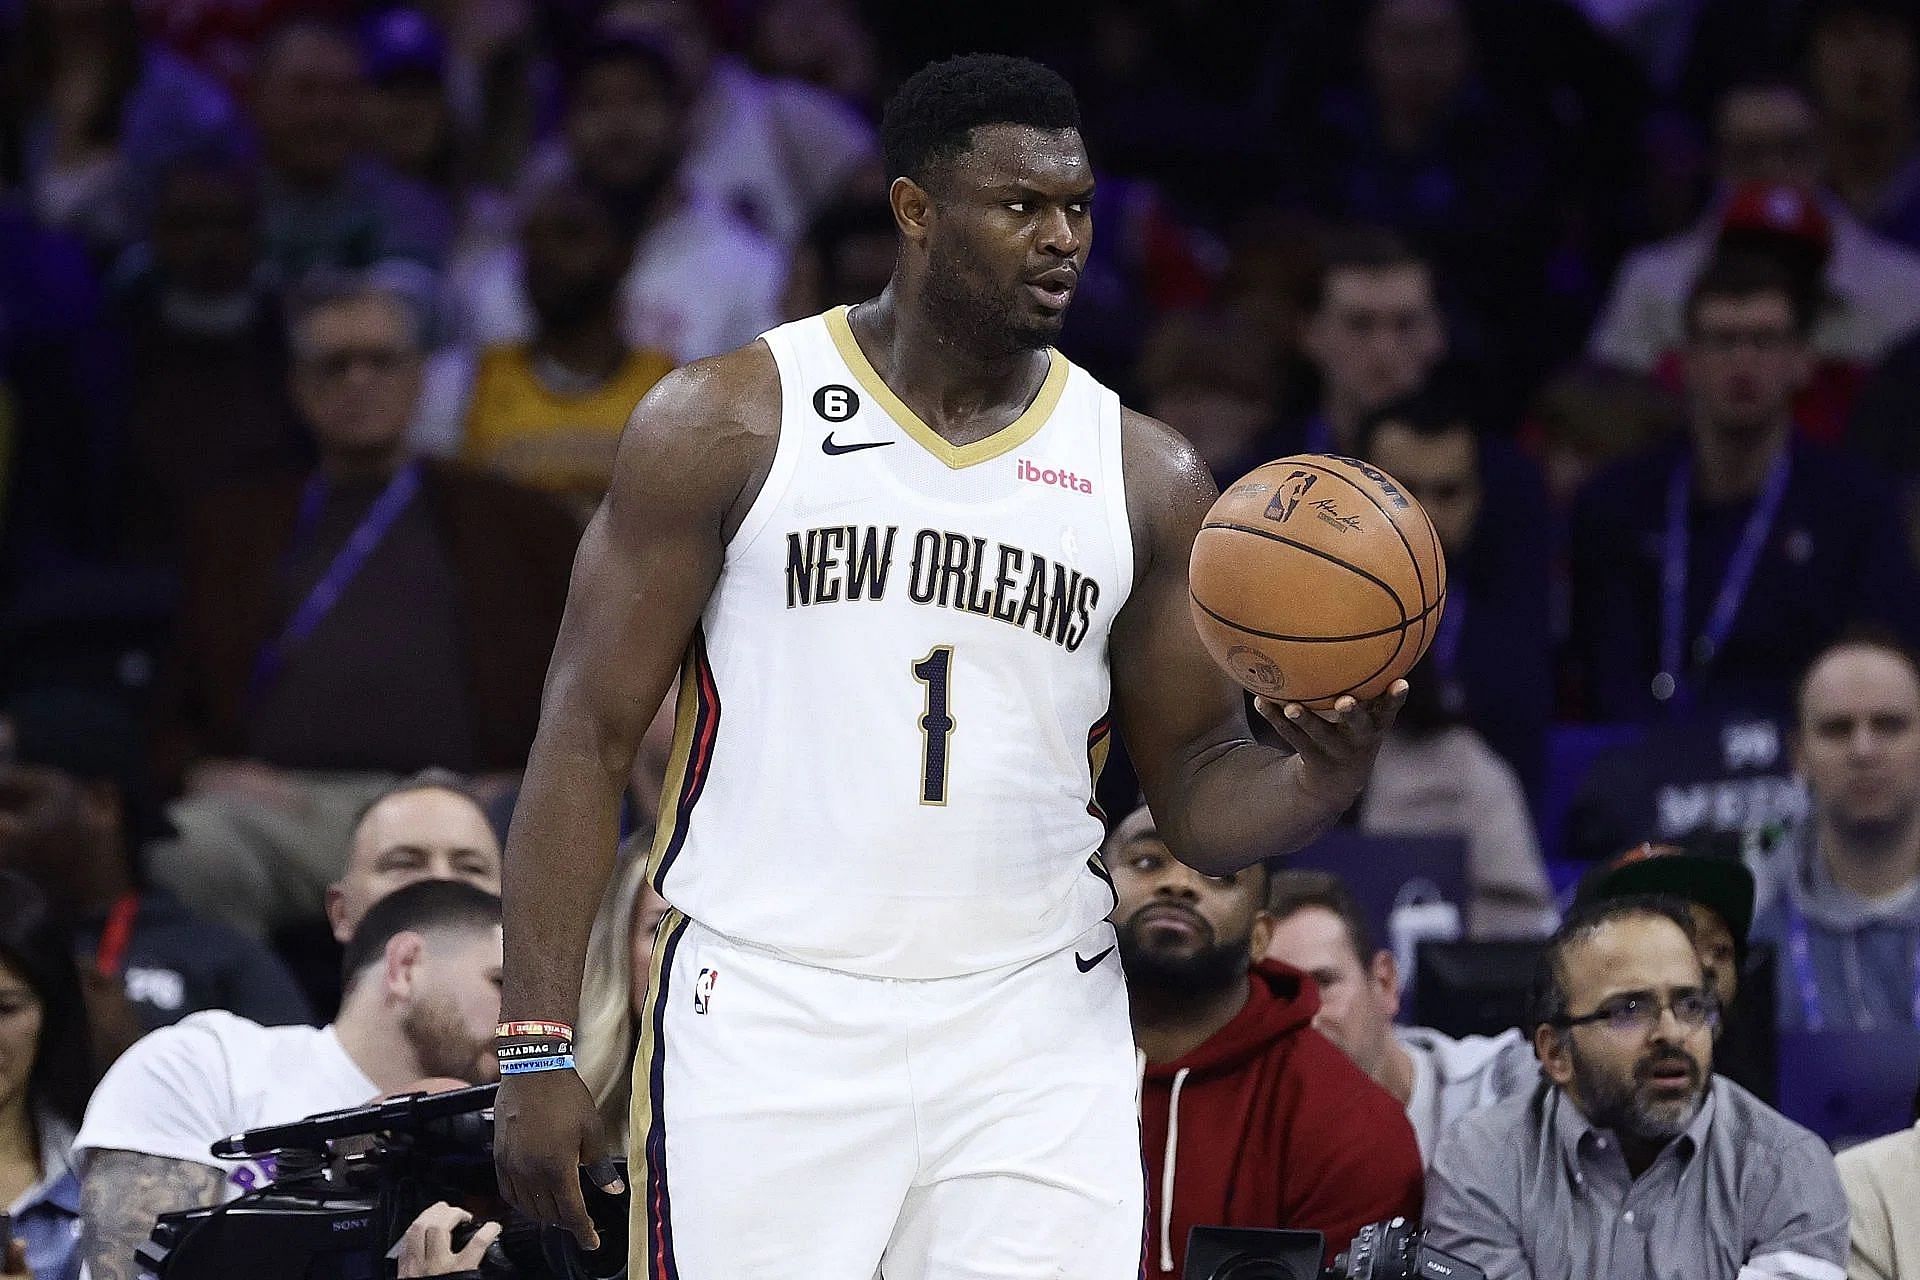 Two-time New Orleans Pelicans All-Star Zion Williamson